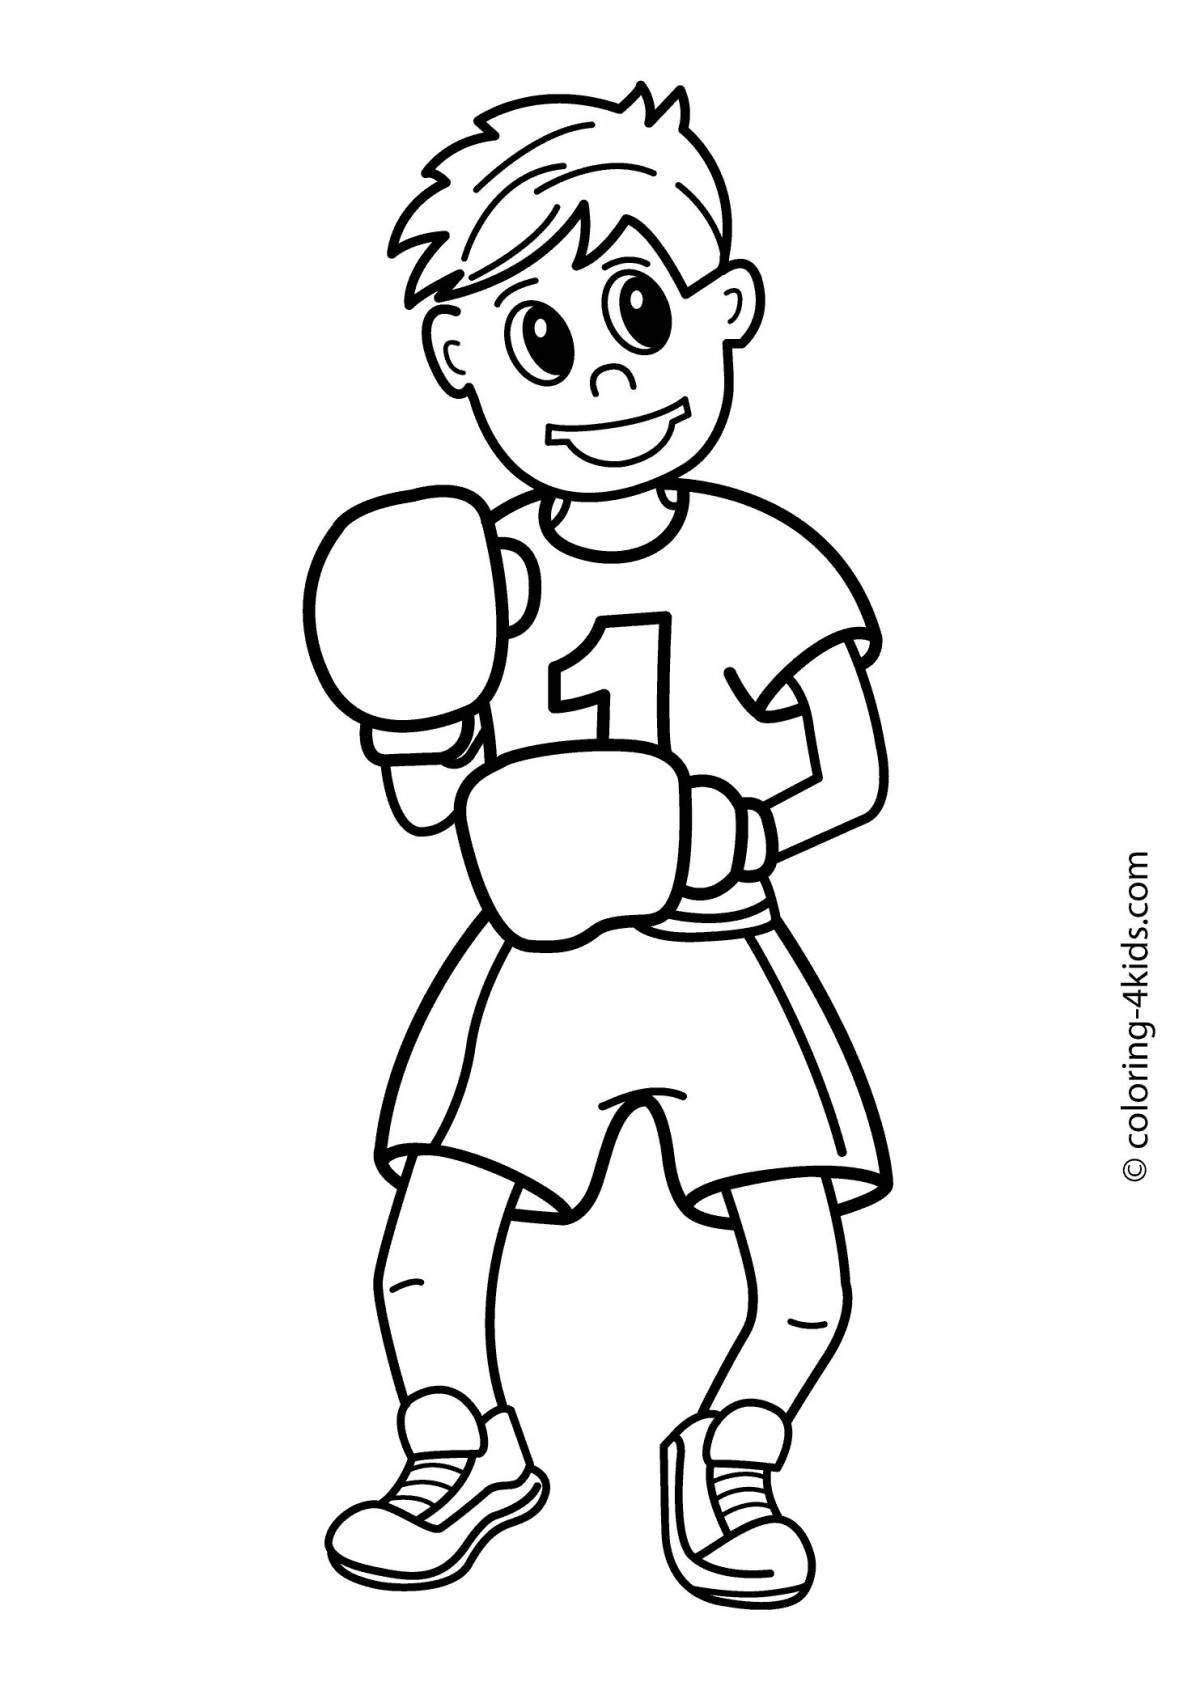 Joyful boxing and boo coloring for kids